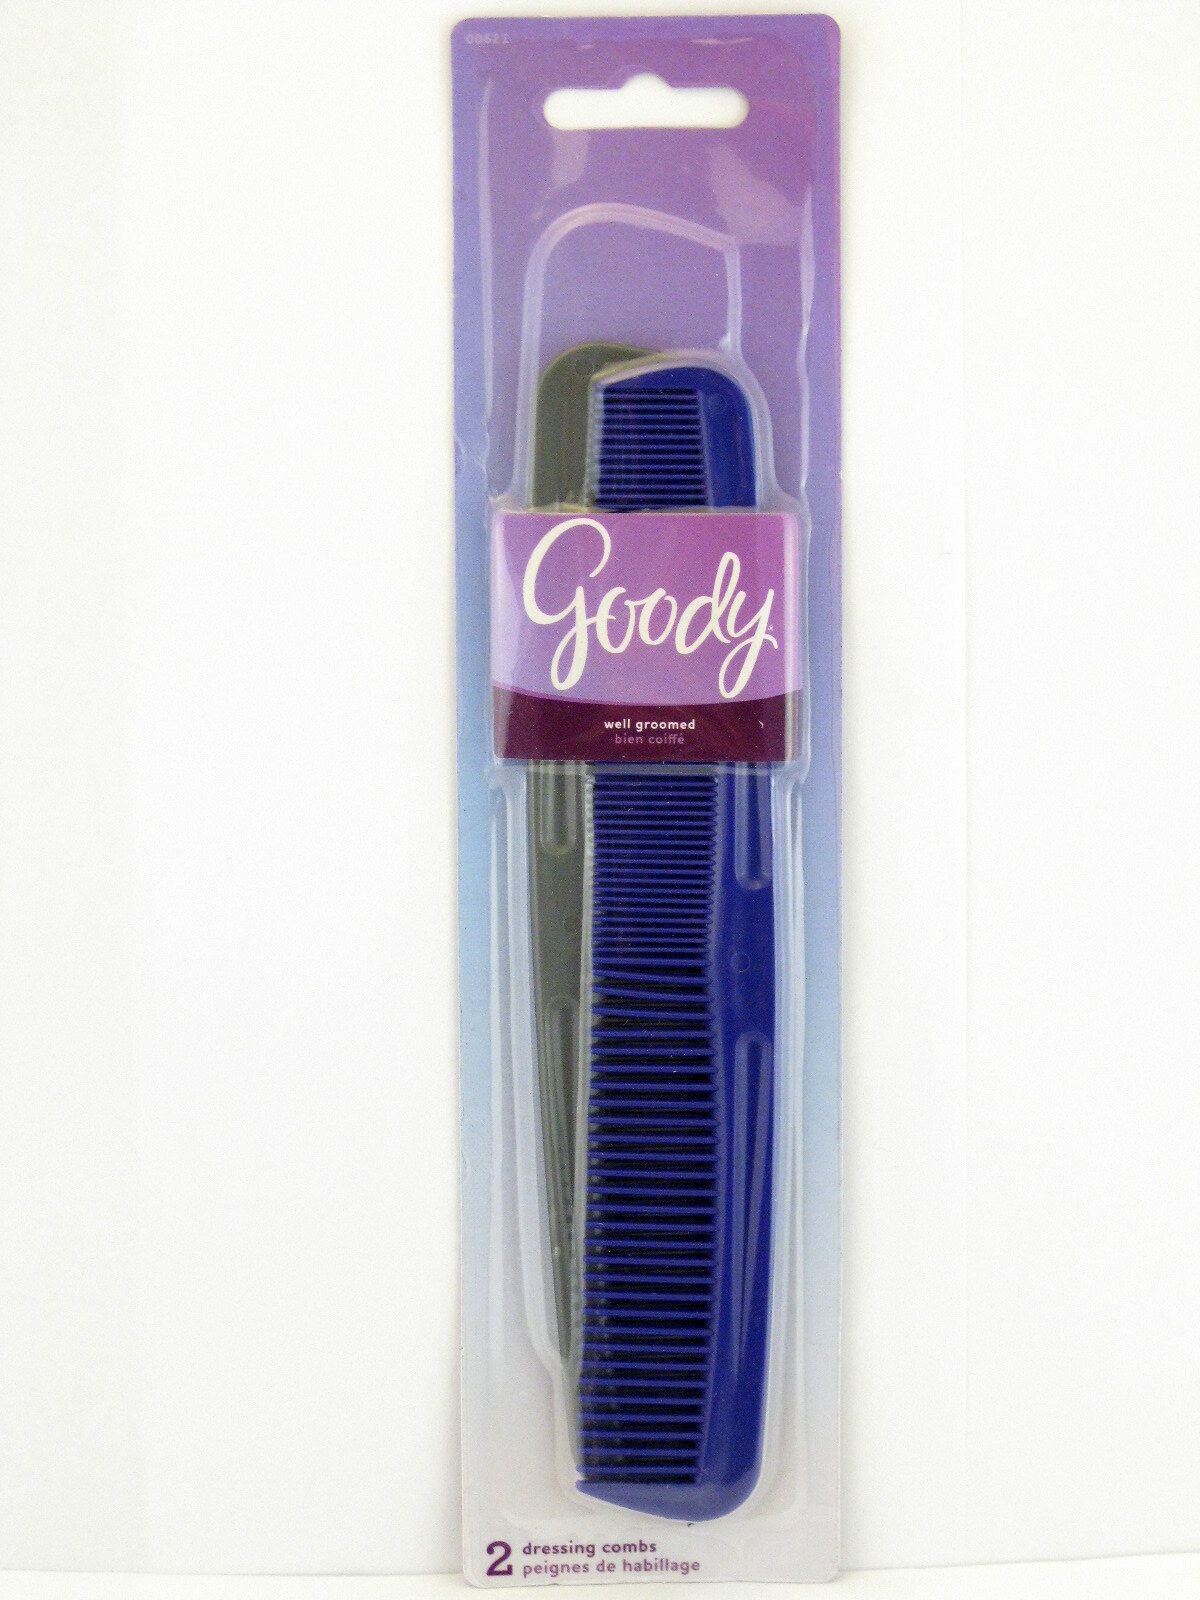 GOODY 7 INCH UTILITY 2 COUNT COMB